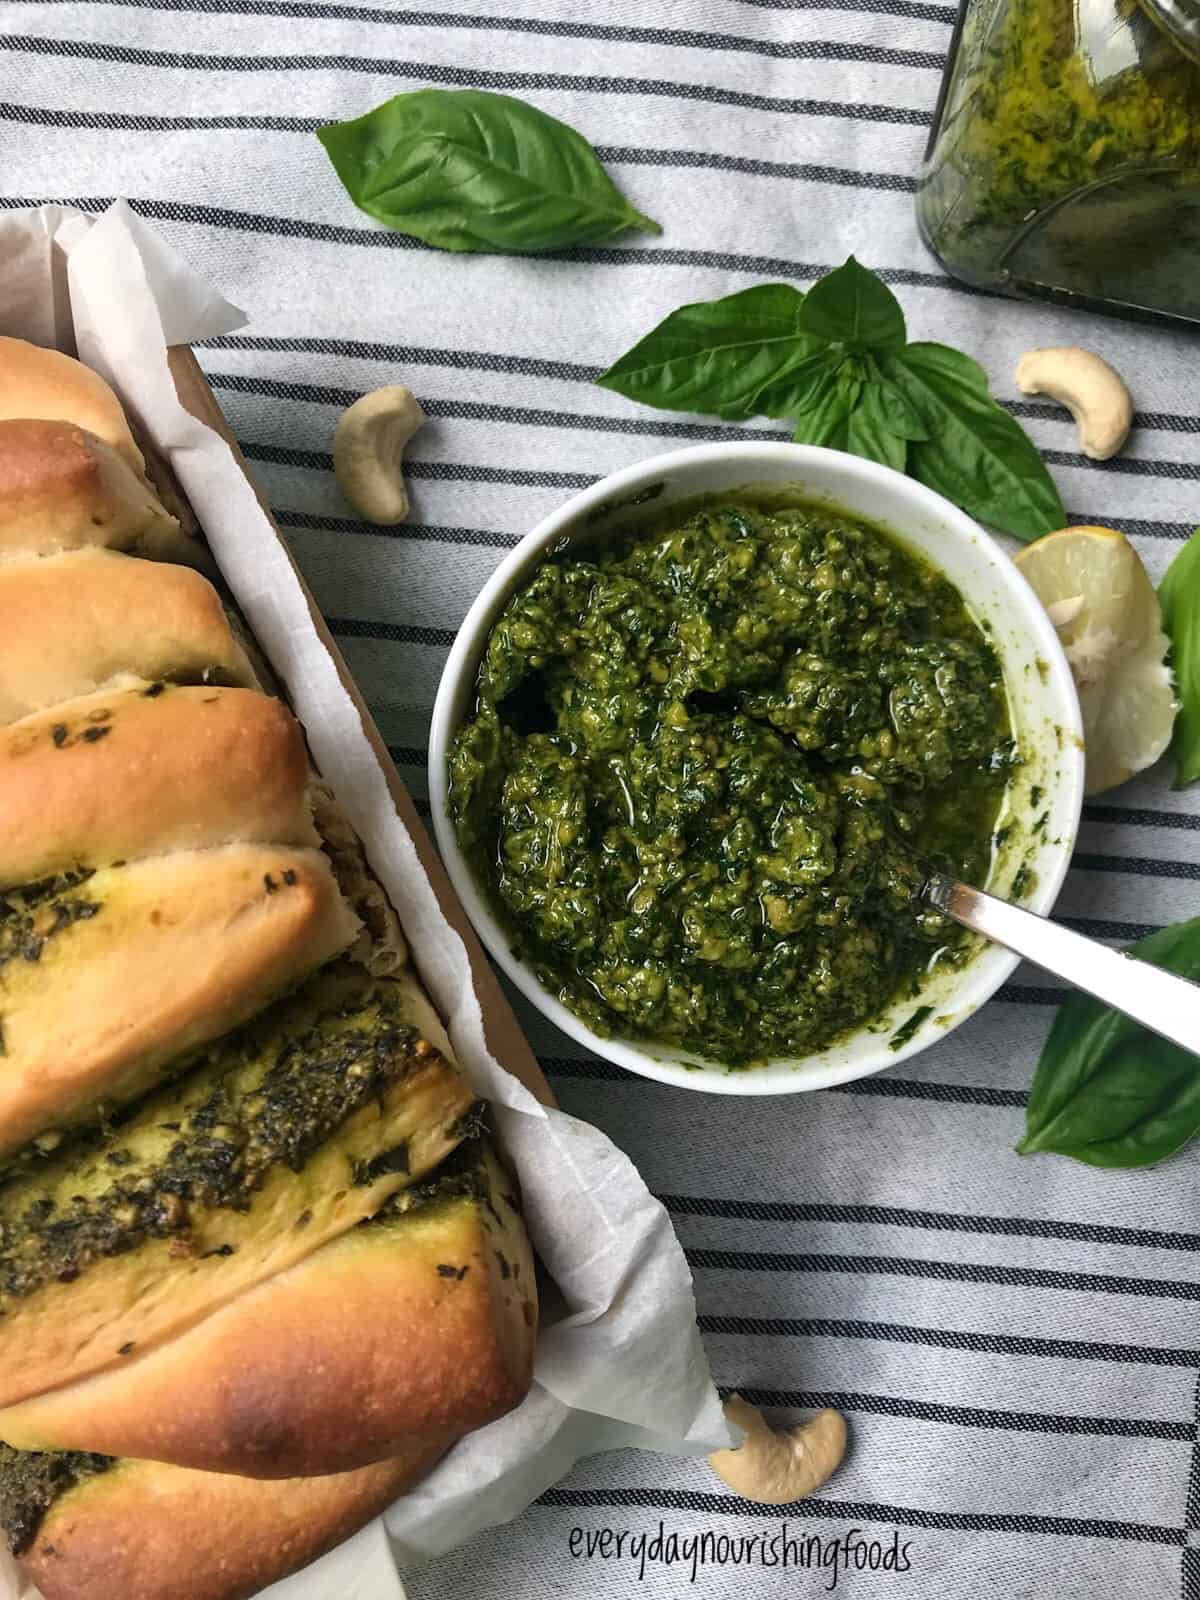 almond pesto in a bowl along with bread